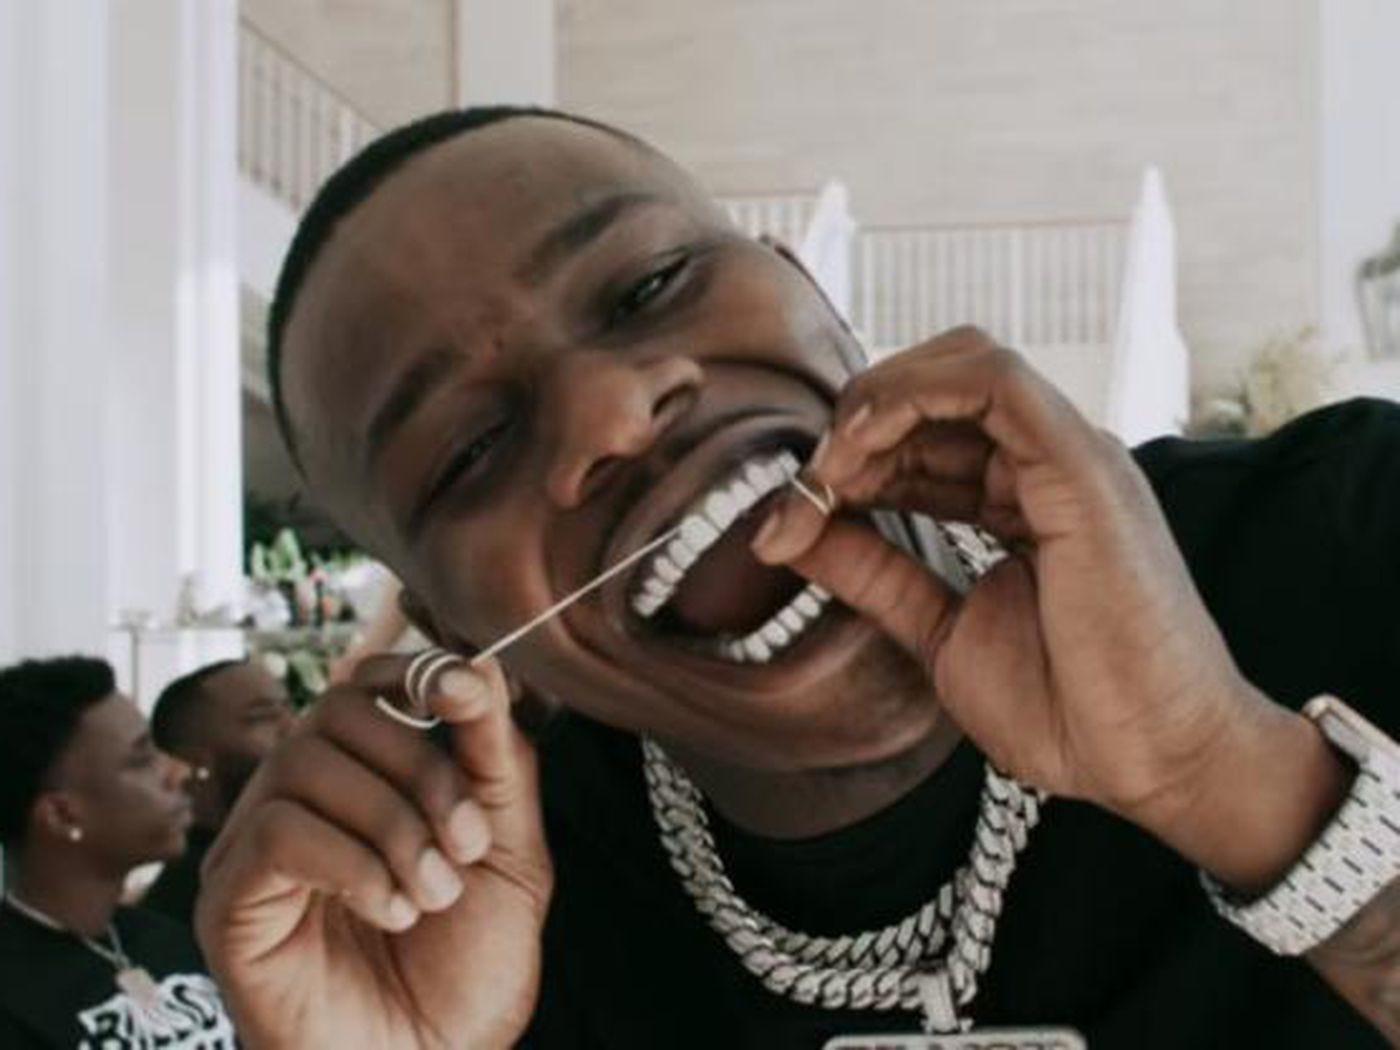 Diddy calls DaBaby the “hottest in the game” - REVOLT